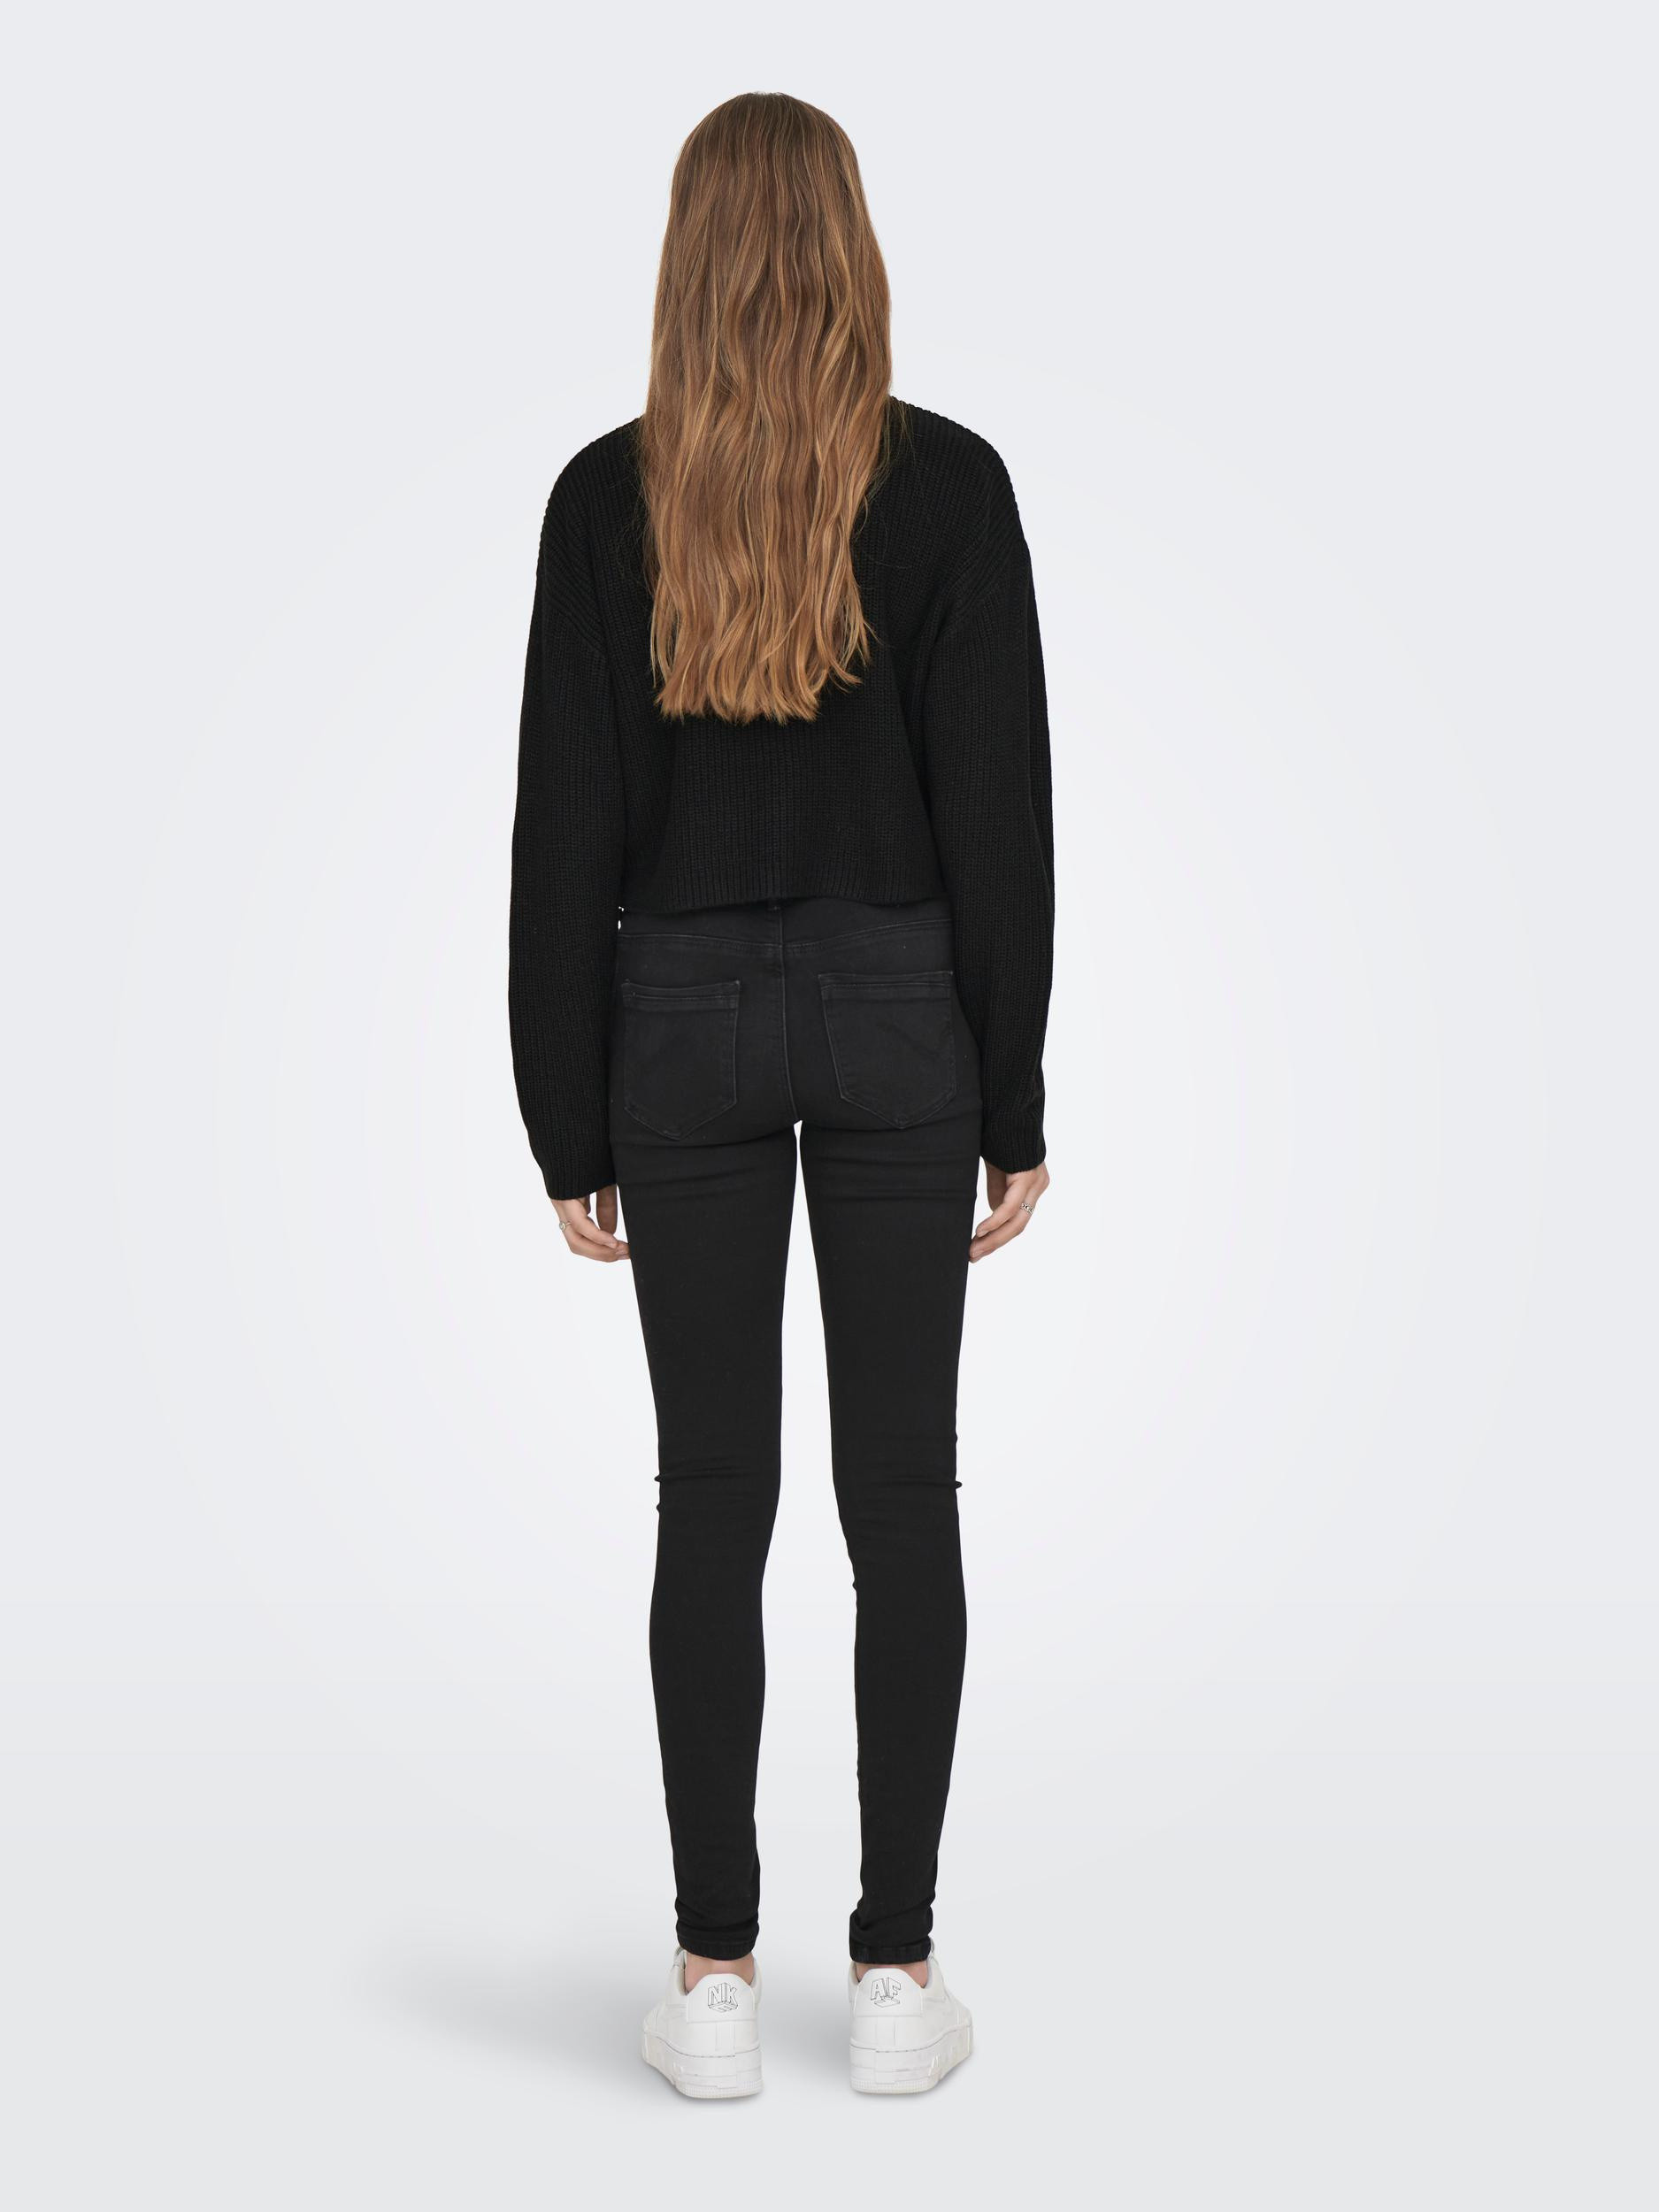 Only - Ribbed pullover, Black, large image number 3